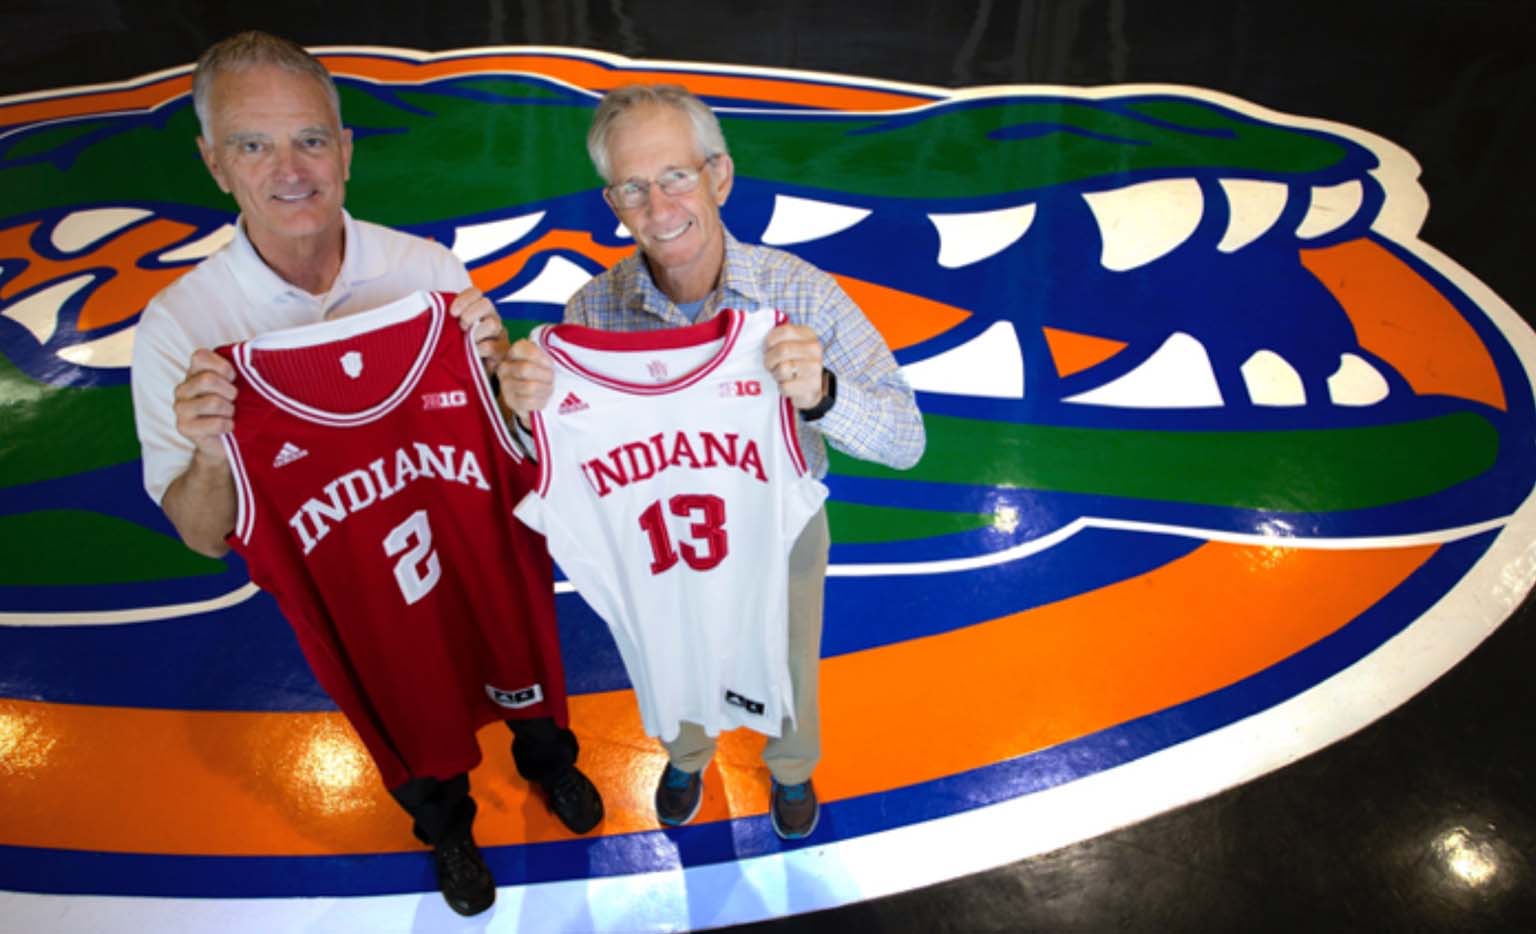 Rob Ferl (left) and Doug Soltis proudly hold up Hoosier basketball jerseys at the Stephen O’Connell Center—home of the Florida Gators—on the campus of the University of Florida, where they both work.